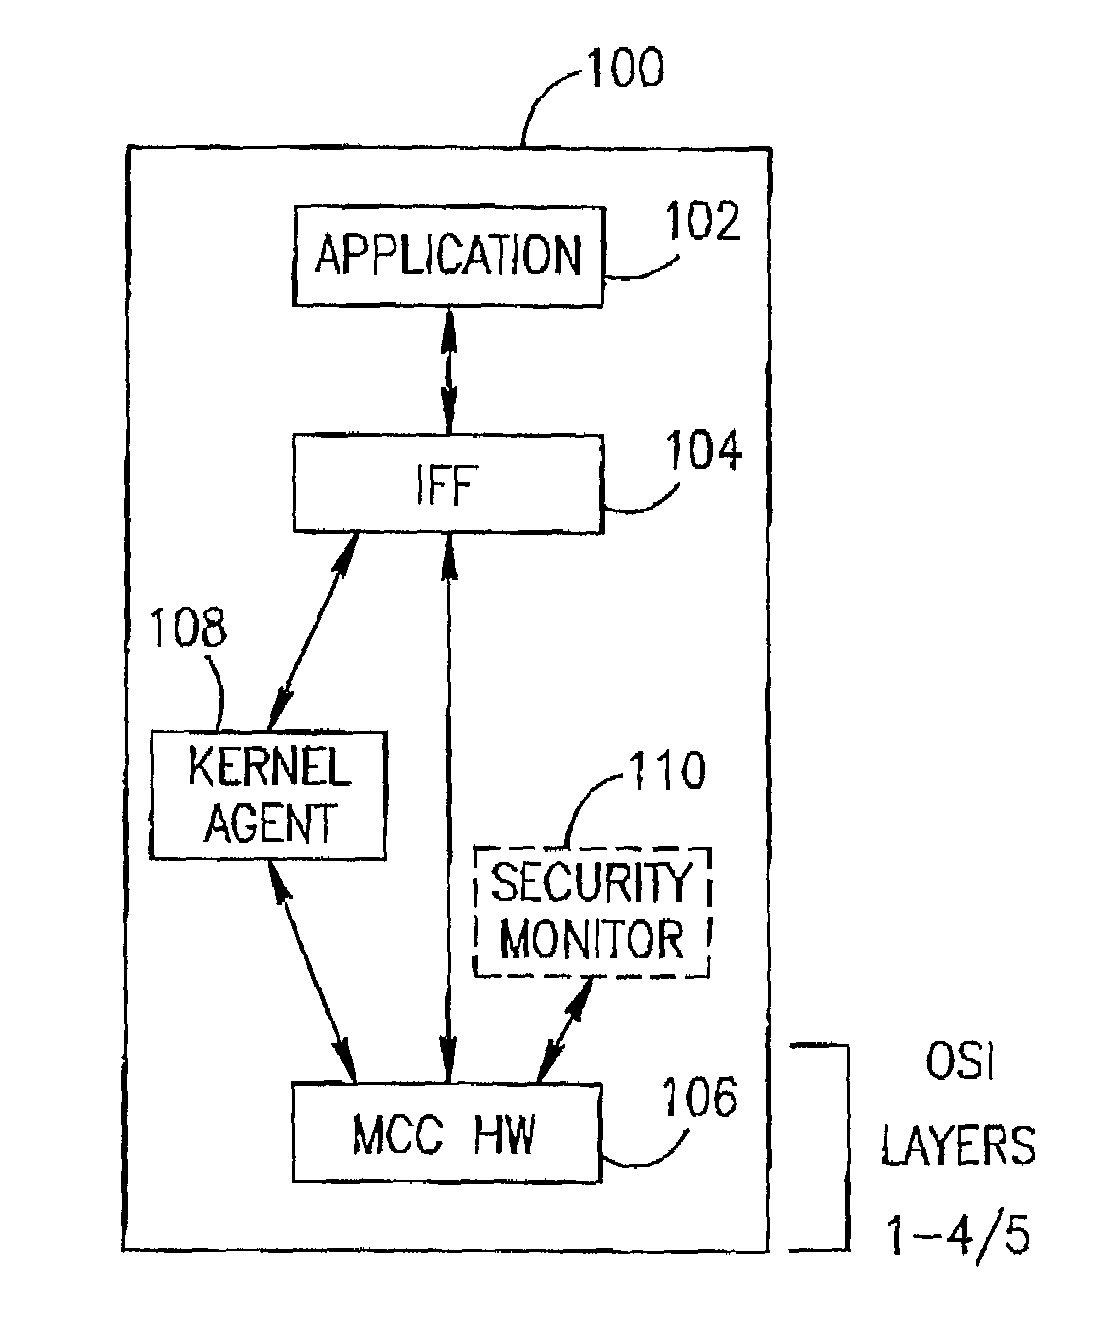 Filtered application-to-application communication